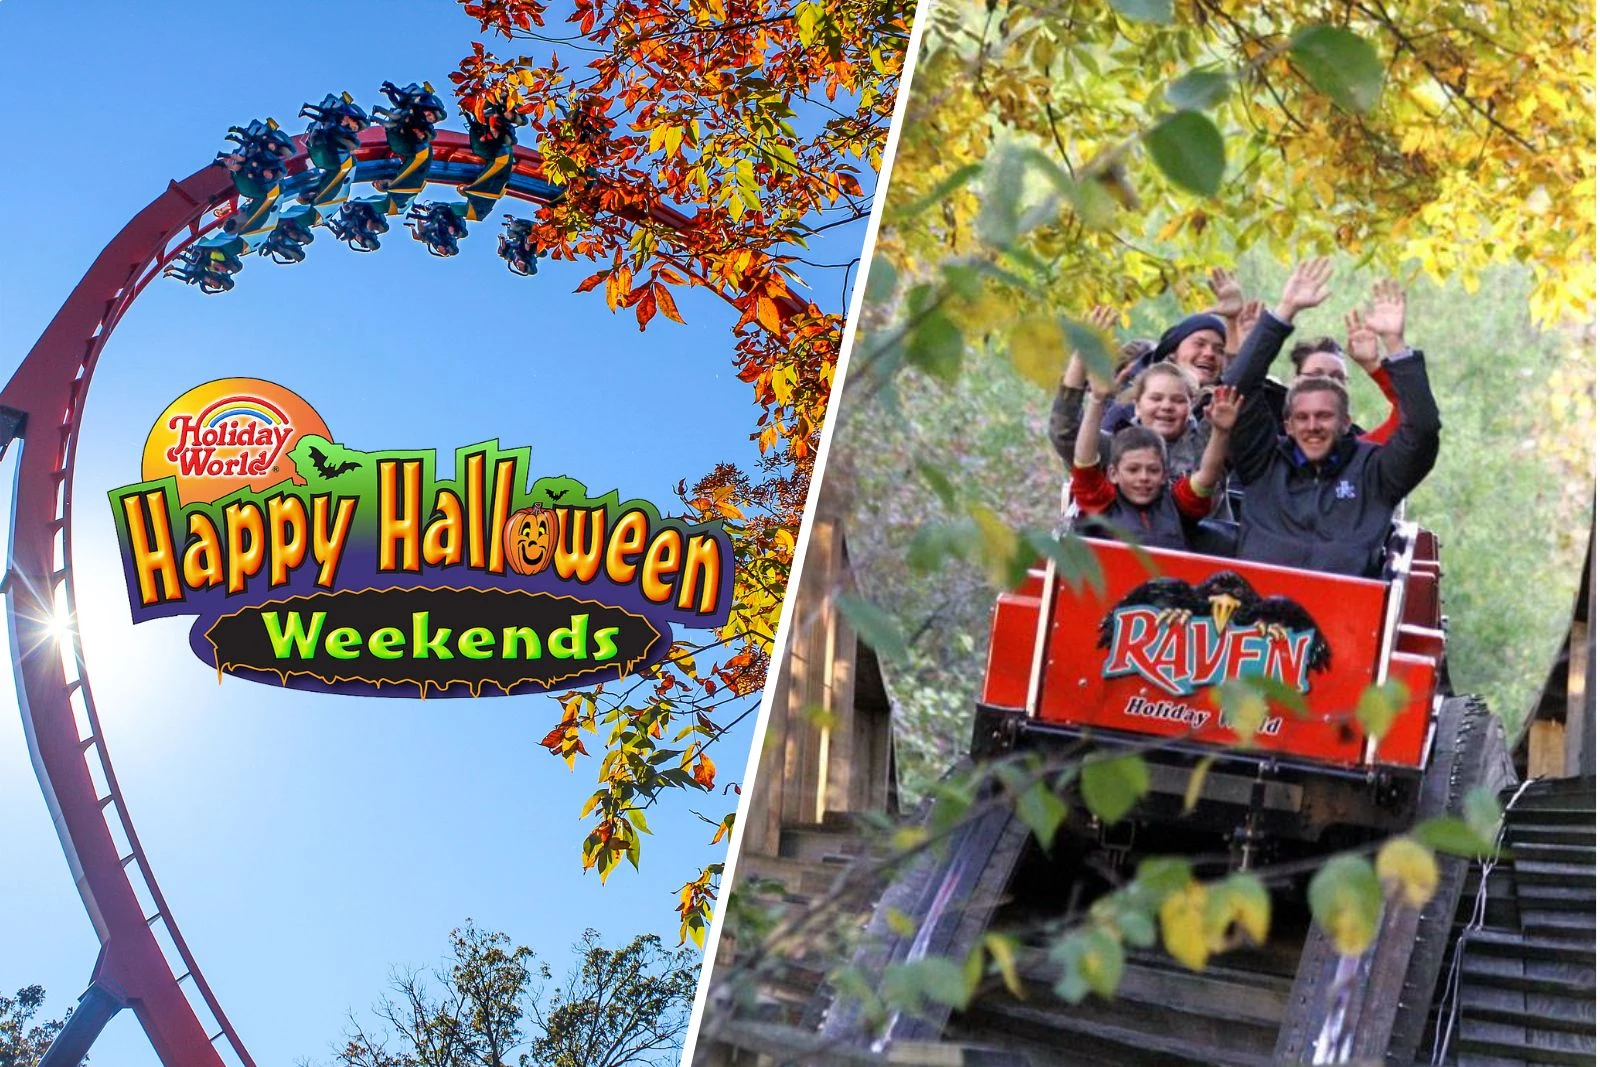 Holiday World Introduces AllNew Happy Halloween Weekends and We Have